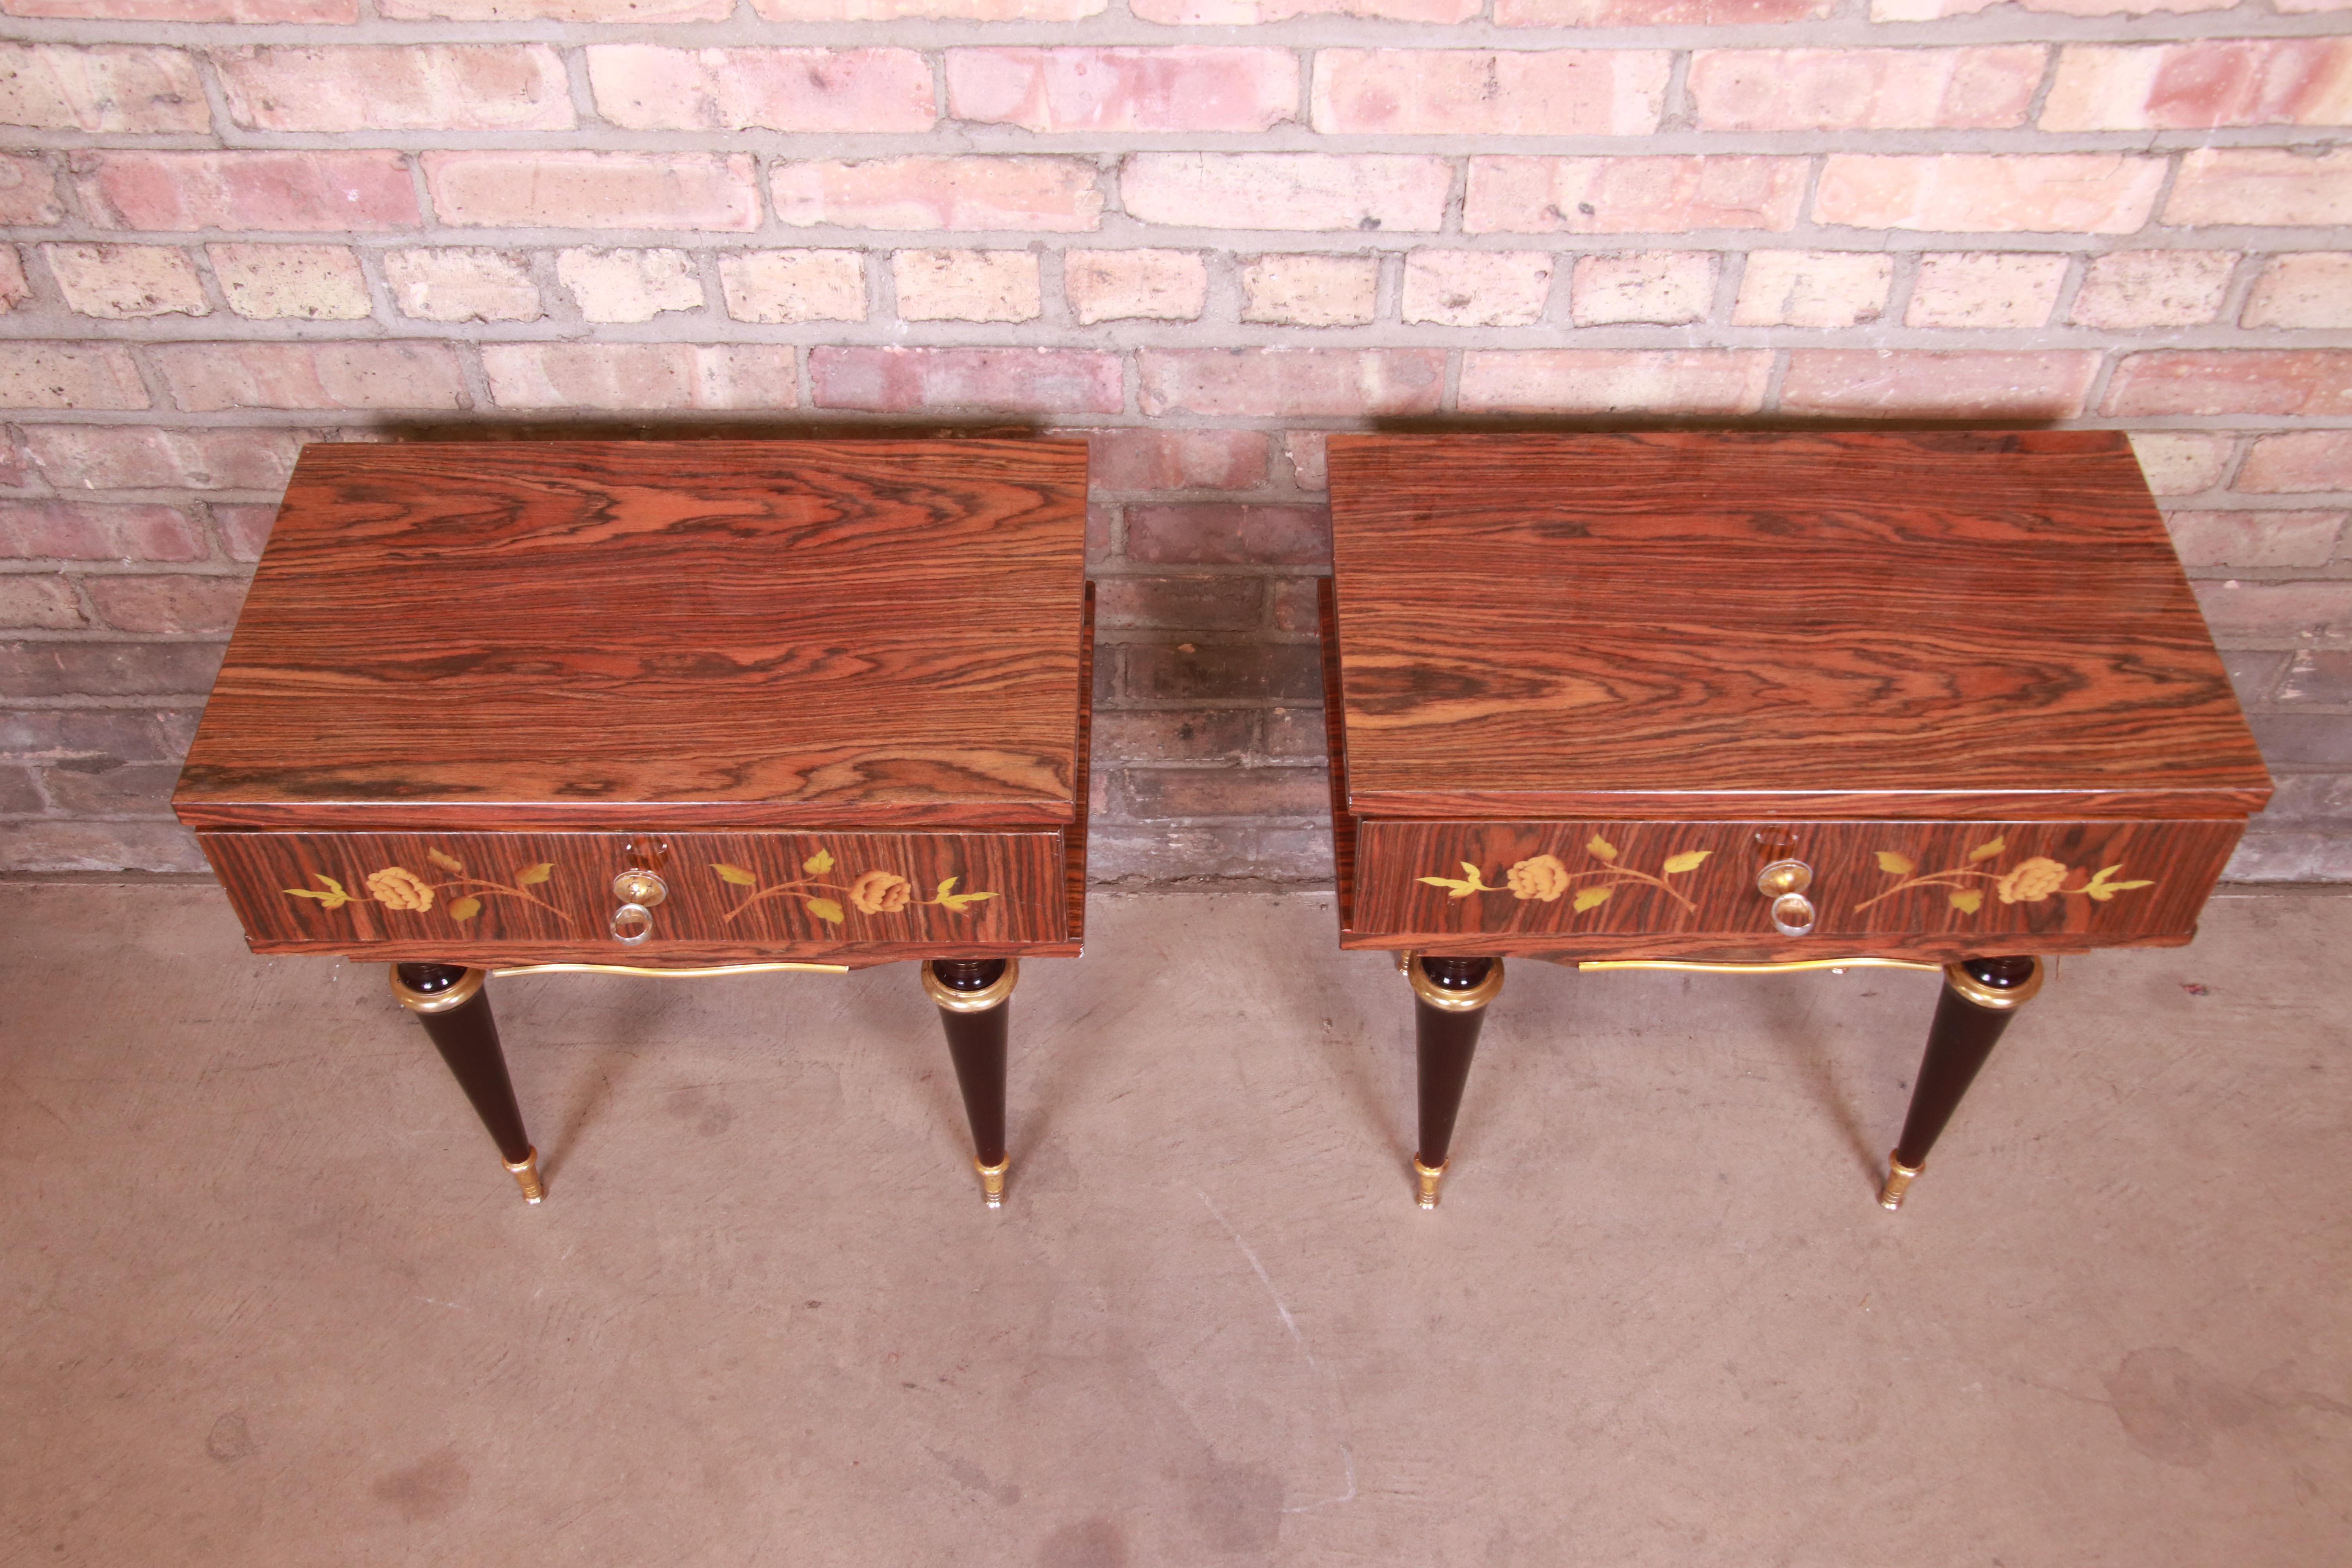 French Art Deco Macassar Ebony Inlaid Marquetry Nightstands, Circa 1950s For Sale 2